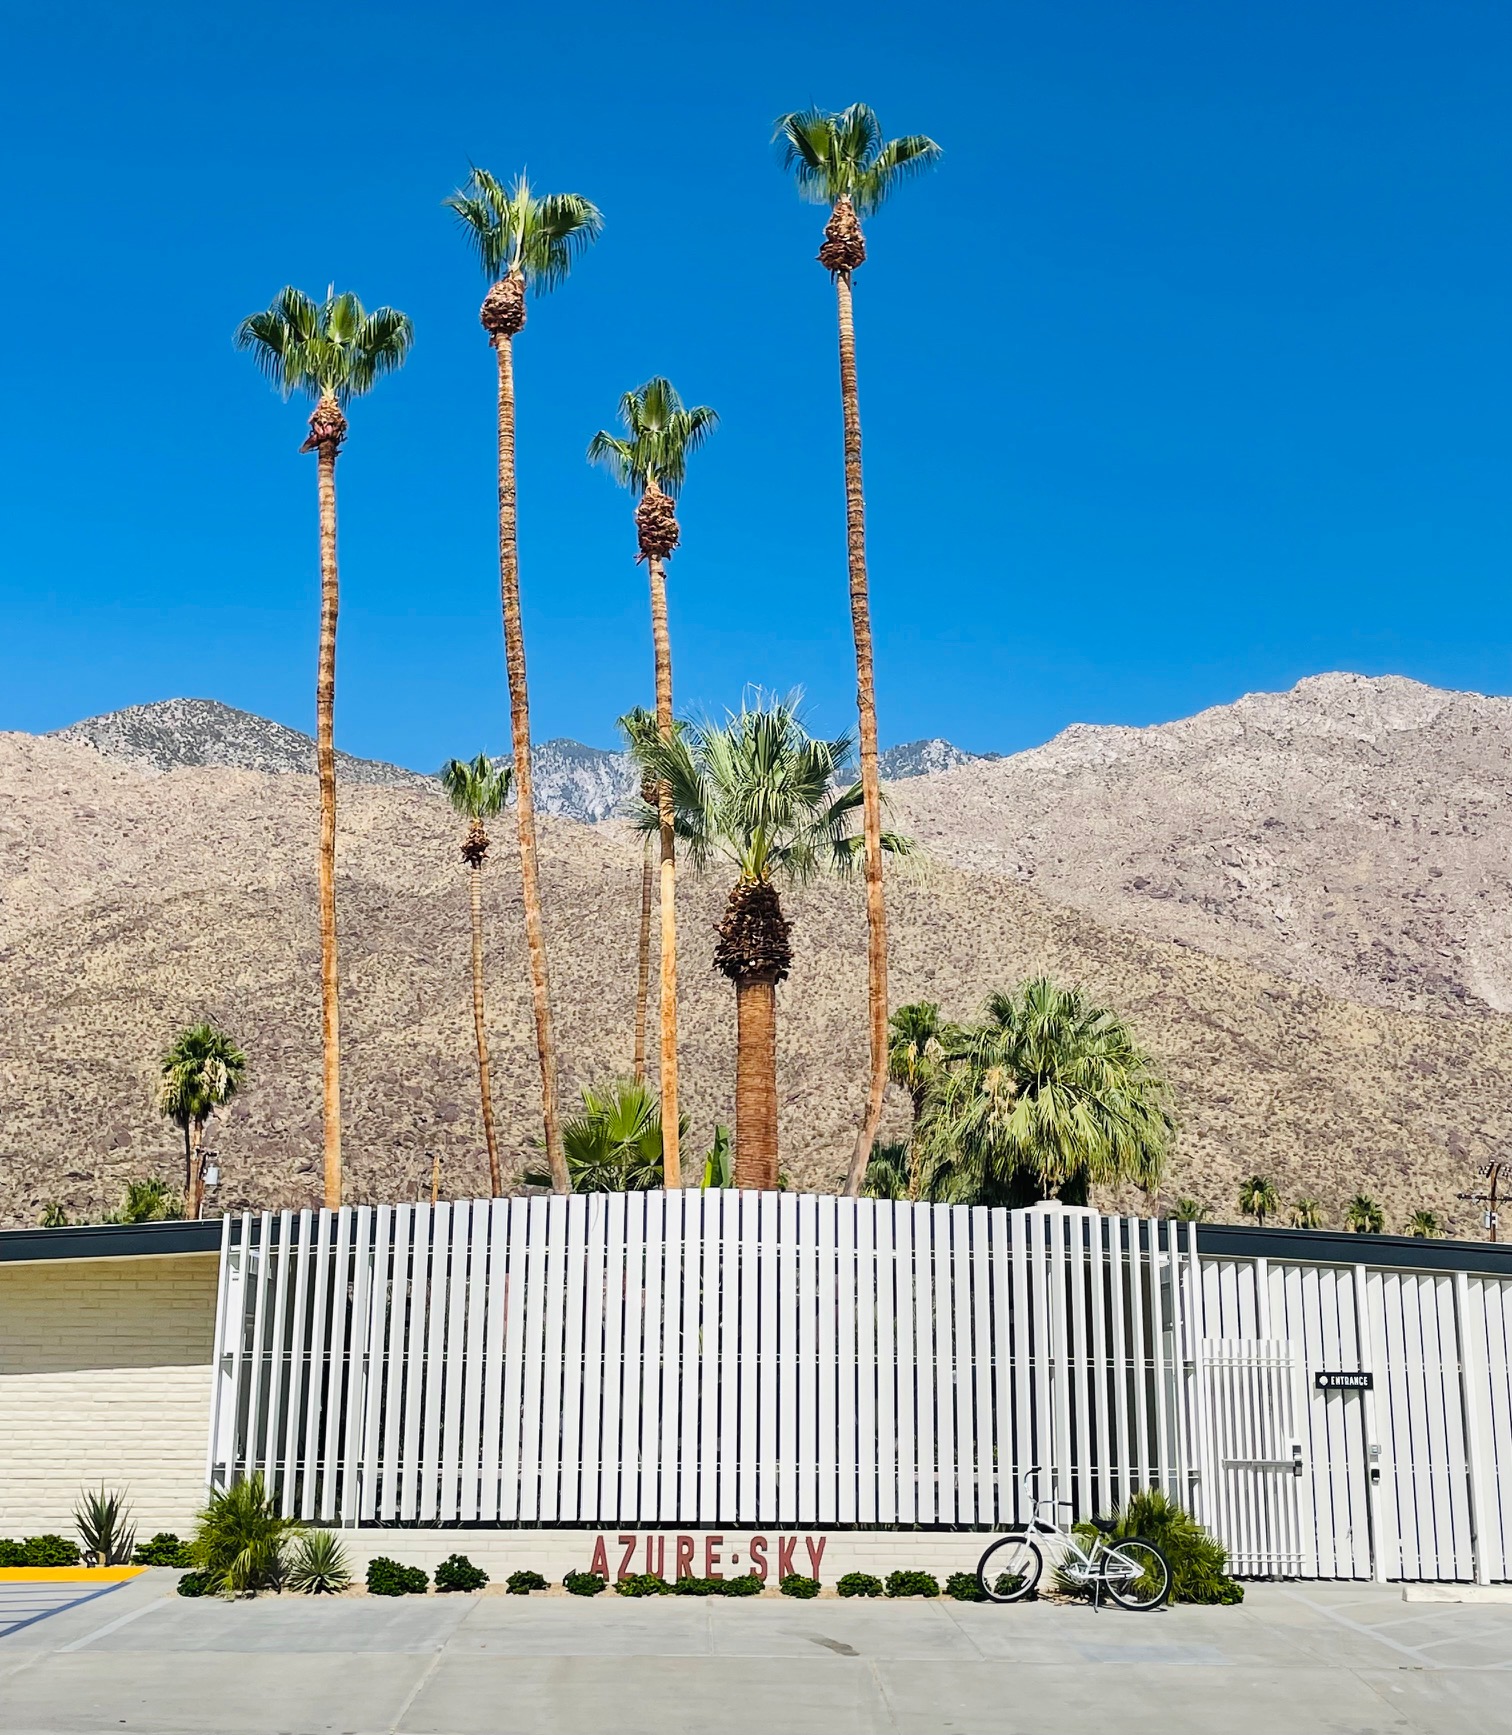 Azure Sky is Palm Springs Newest and Coolest Oasis